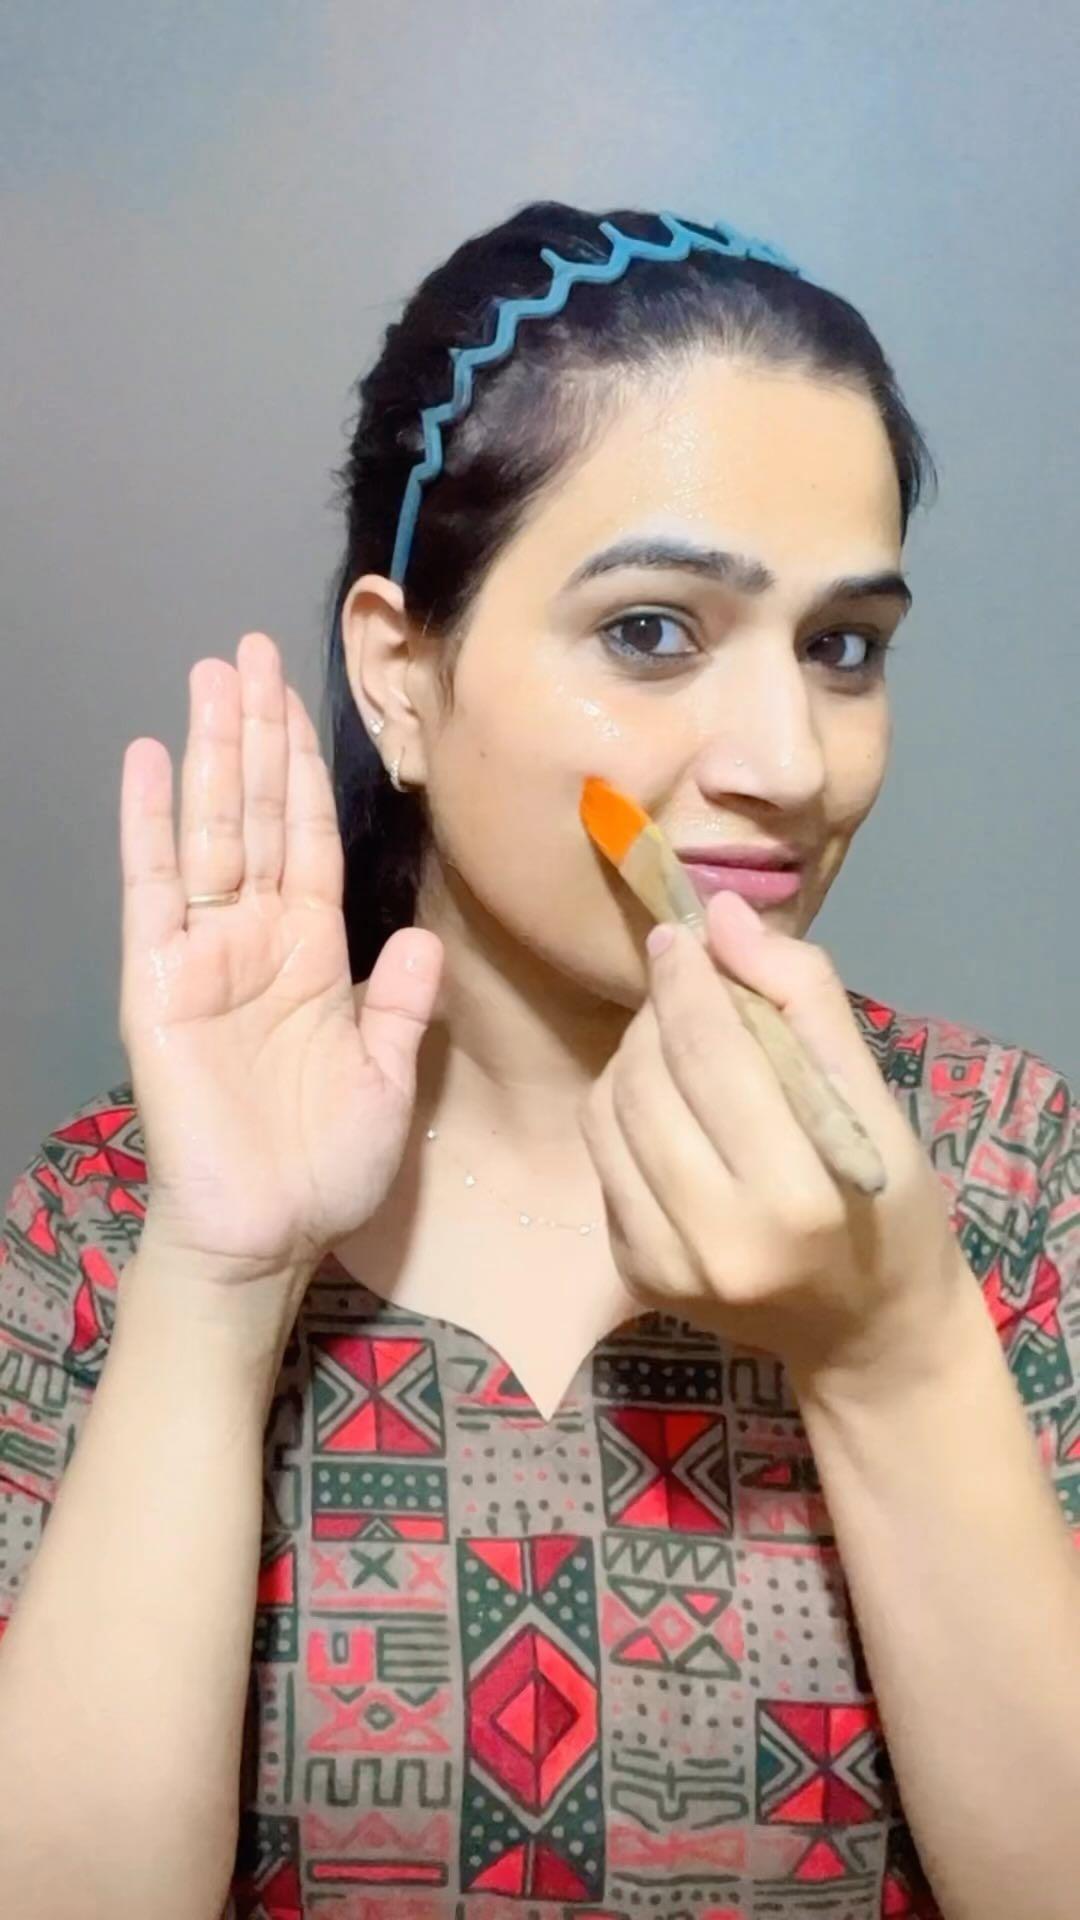 class="content__text"
 😱Unique Parlour like clean up at home with your hand only.
.
.
Face wash: curd + gram flour 
Scrub: @good_vibes.in Alovera gel + rice flour 
Facepack: honey+ turmeric 
Serum: @good_vibes.in 
.
.
Follow for more.
 #skincare #skincareroutine #trendingreels 
 